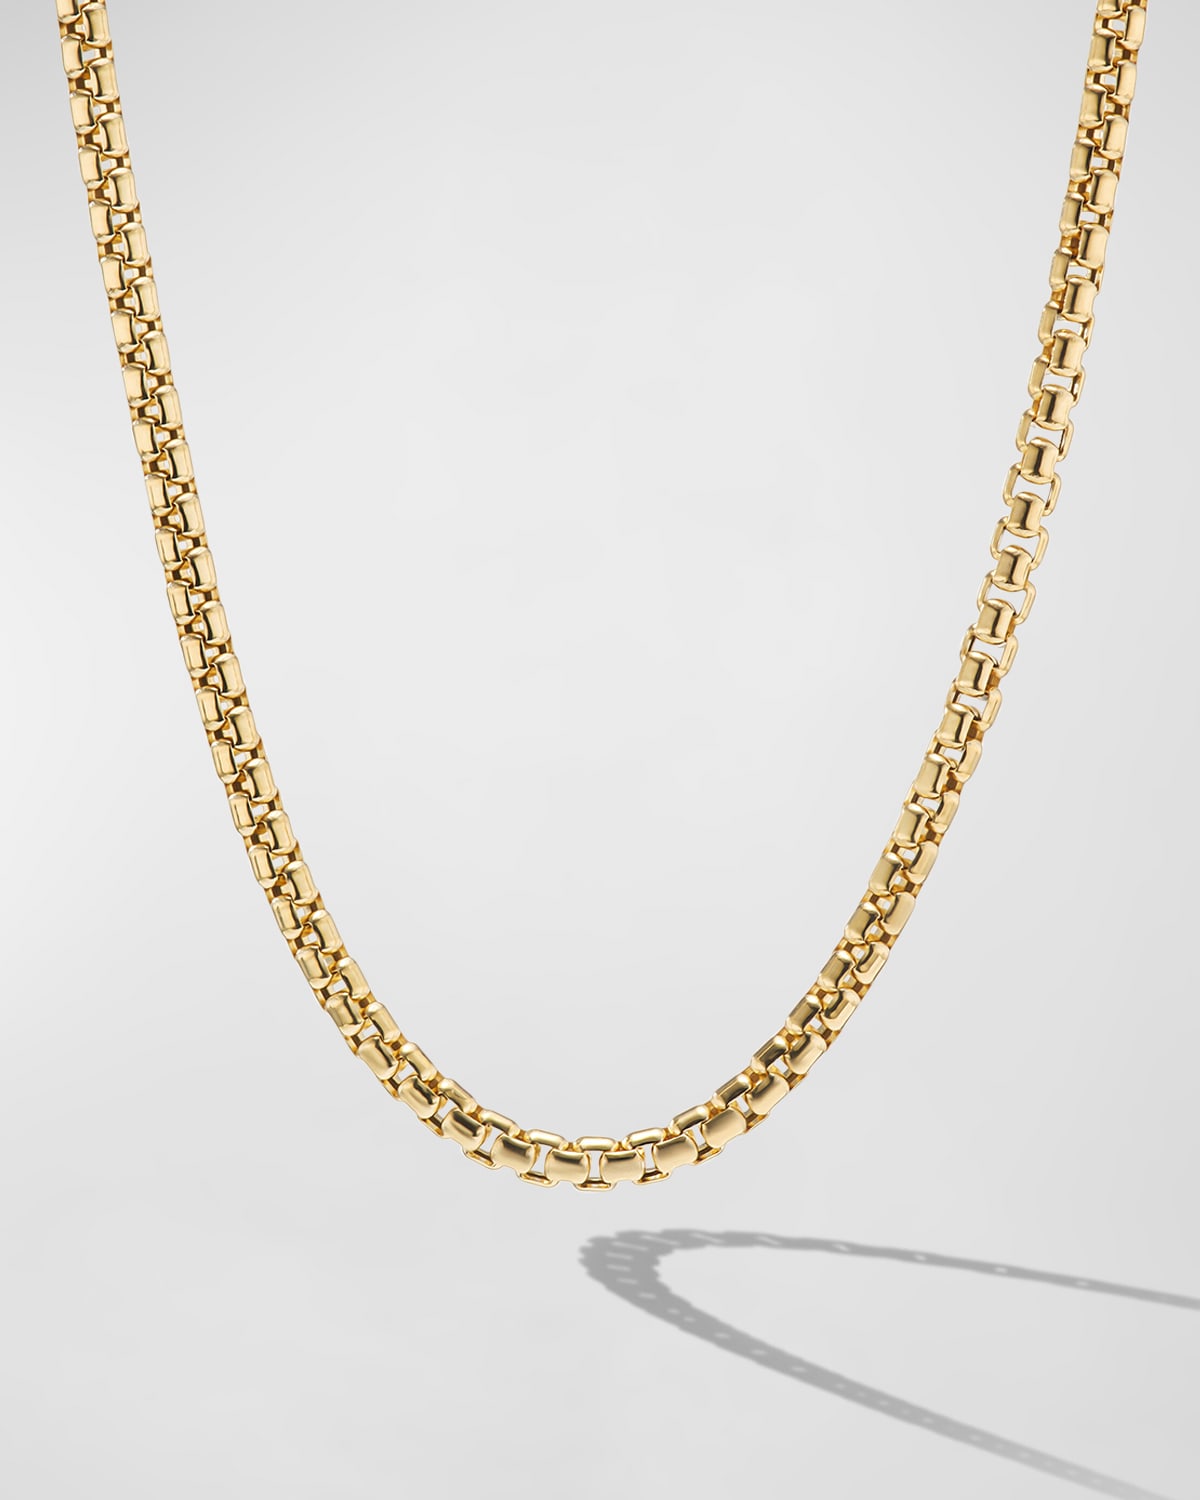 Men's Box Chain Necklace in 18K Gold, 2.7m, 26"L